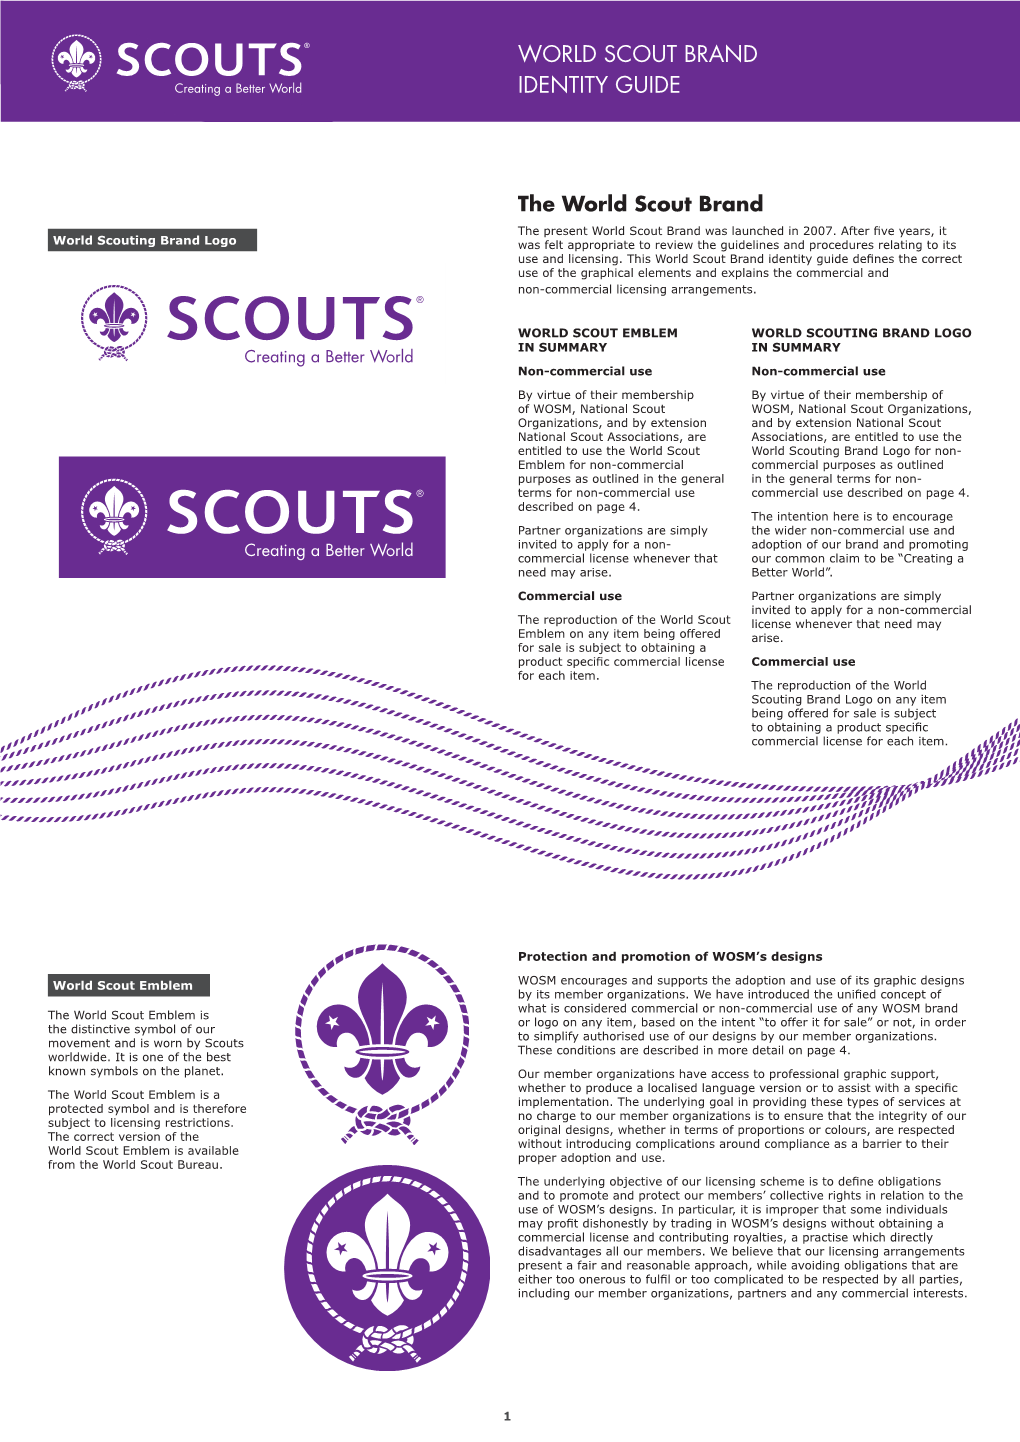 World Scout Brand Identity Guide